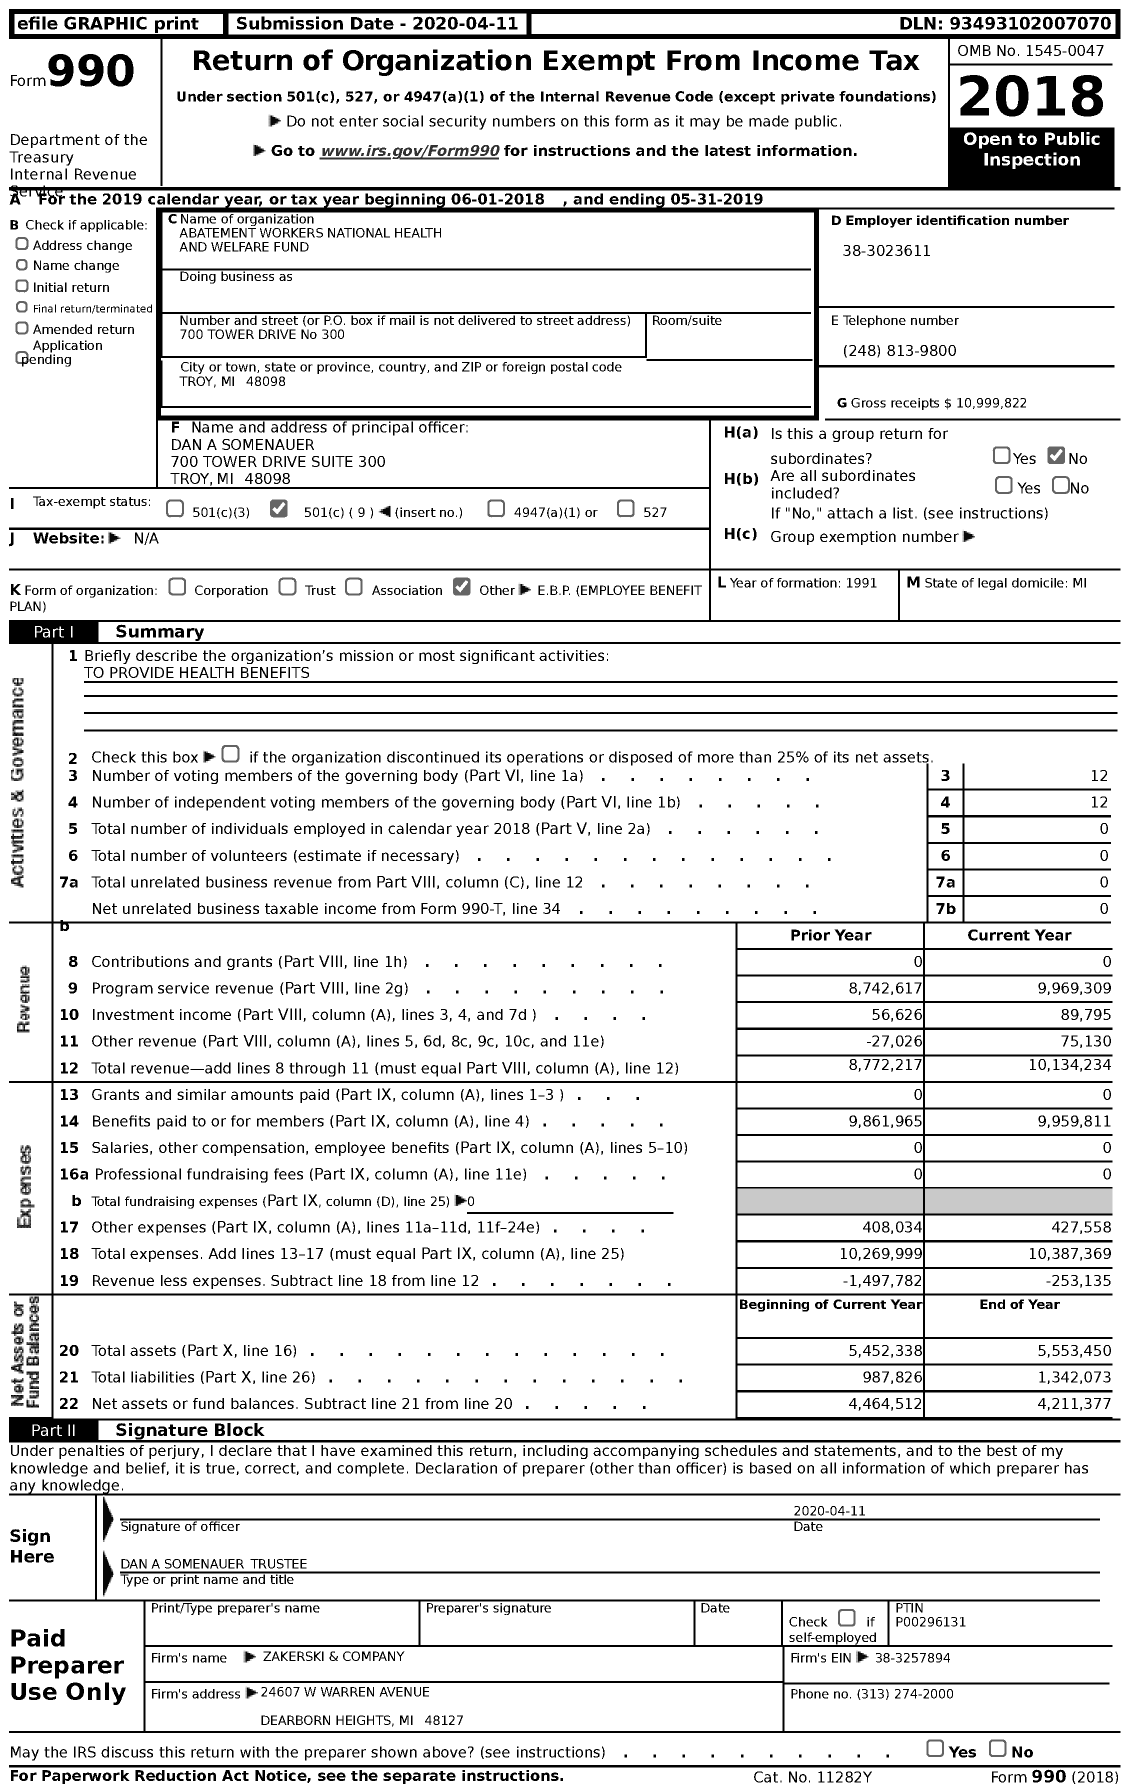 Image of first page of 2018 Form 990 for Abatement Workers National Health and Welfare Fund